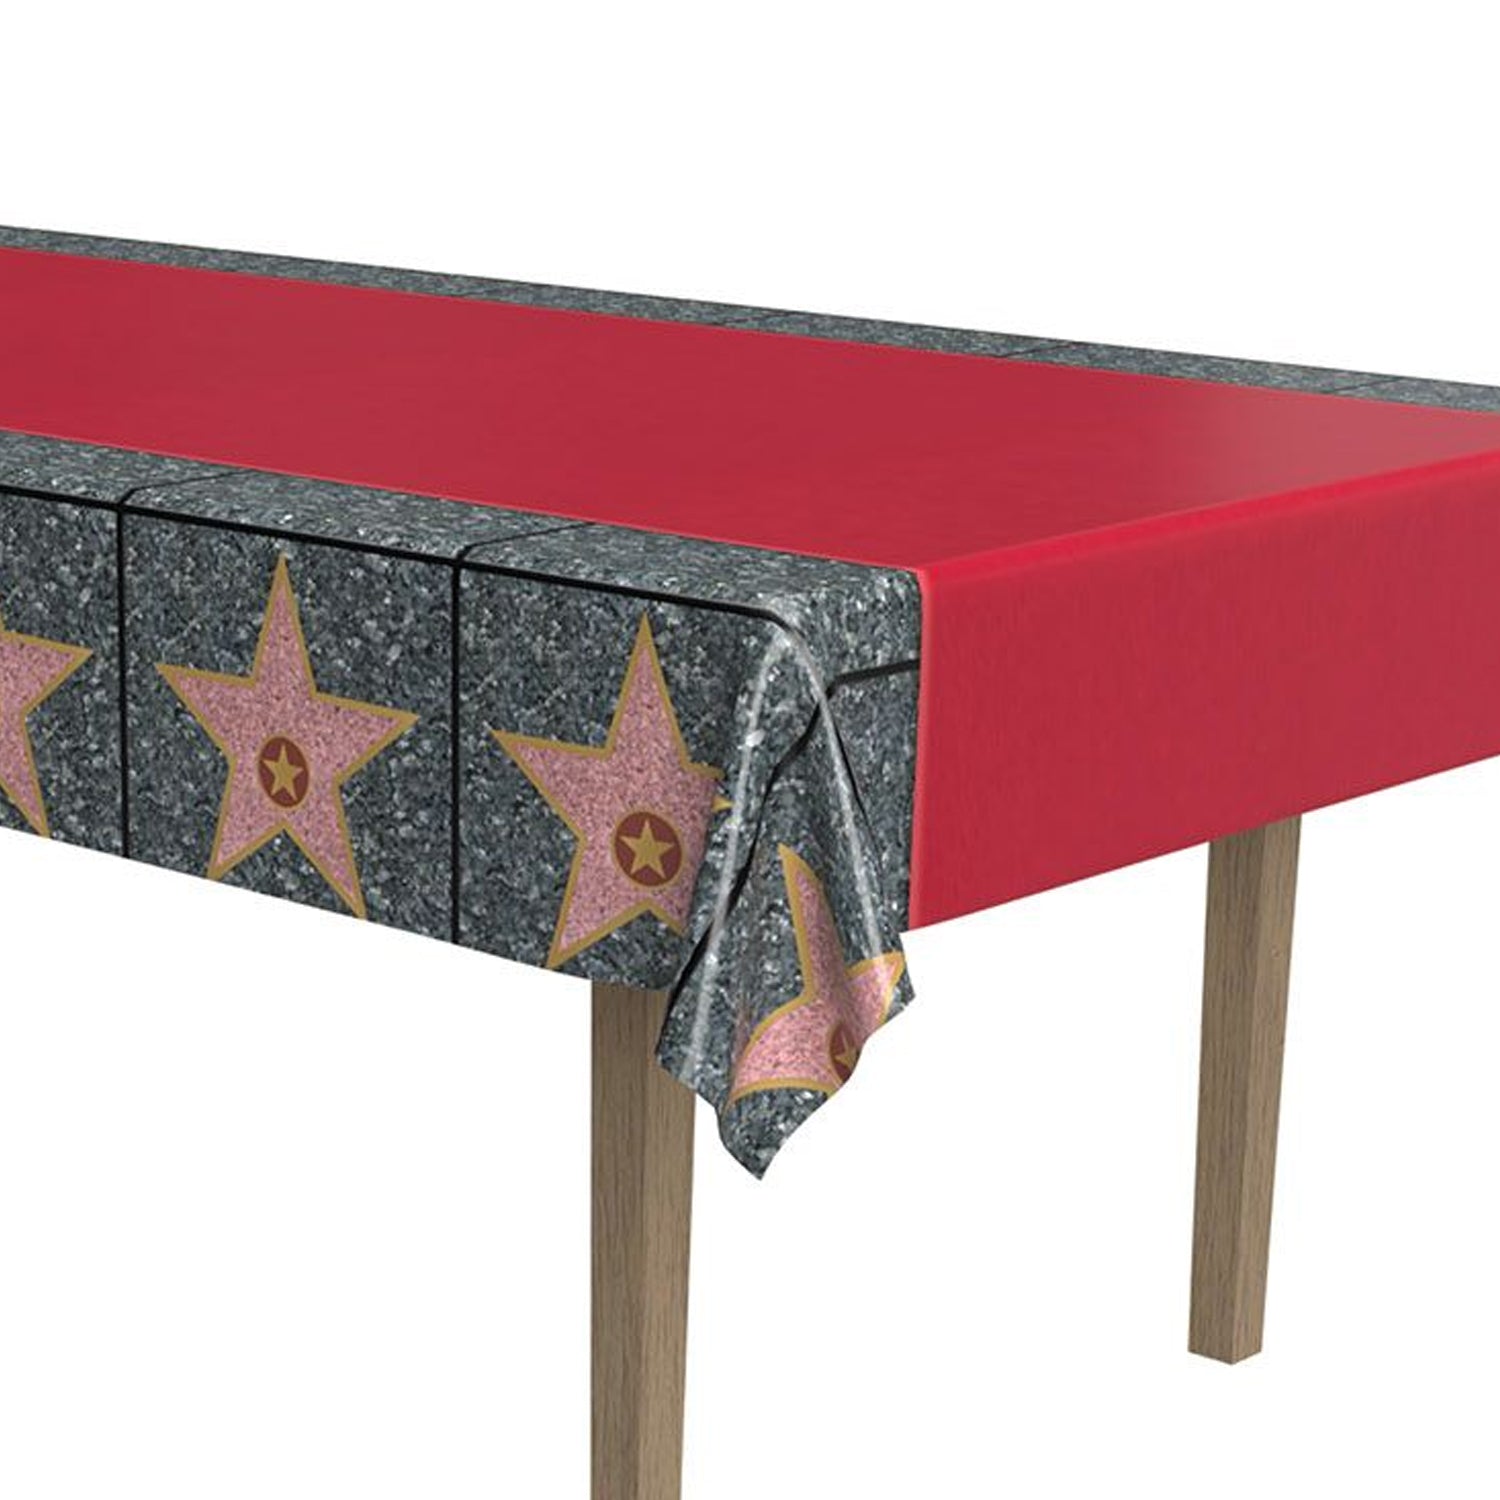 Red Carpet Hollywood Star Walk of Fame Tablecover - 1.4m x 2.7m